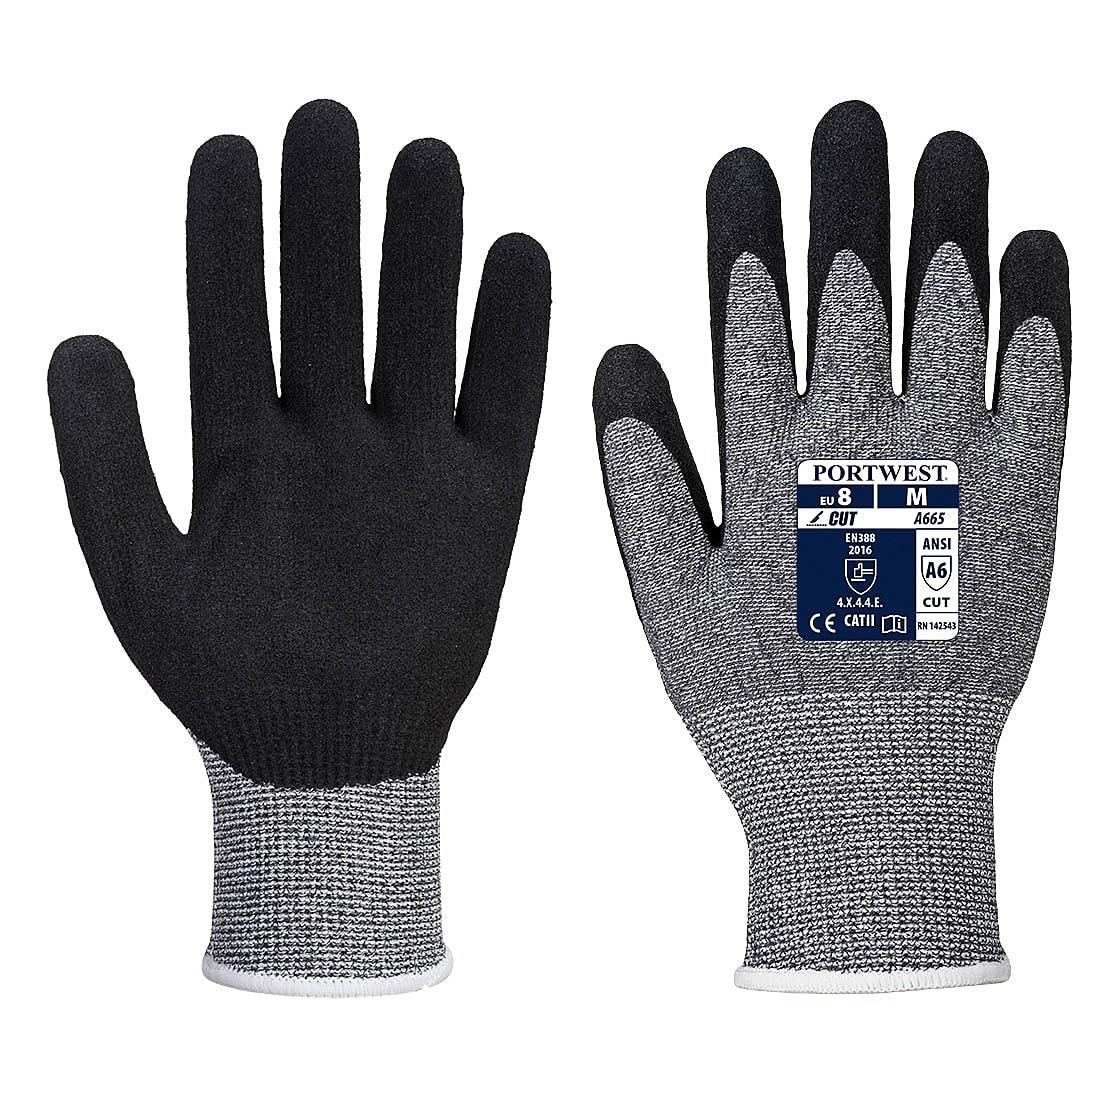 Portwest VHR Advanced Cut Gloves in Grey (Product Code: A665)